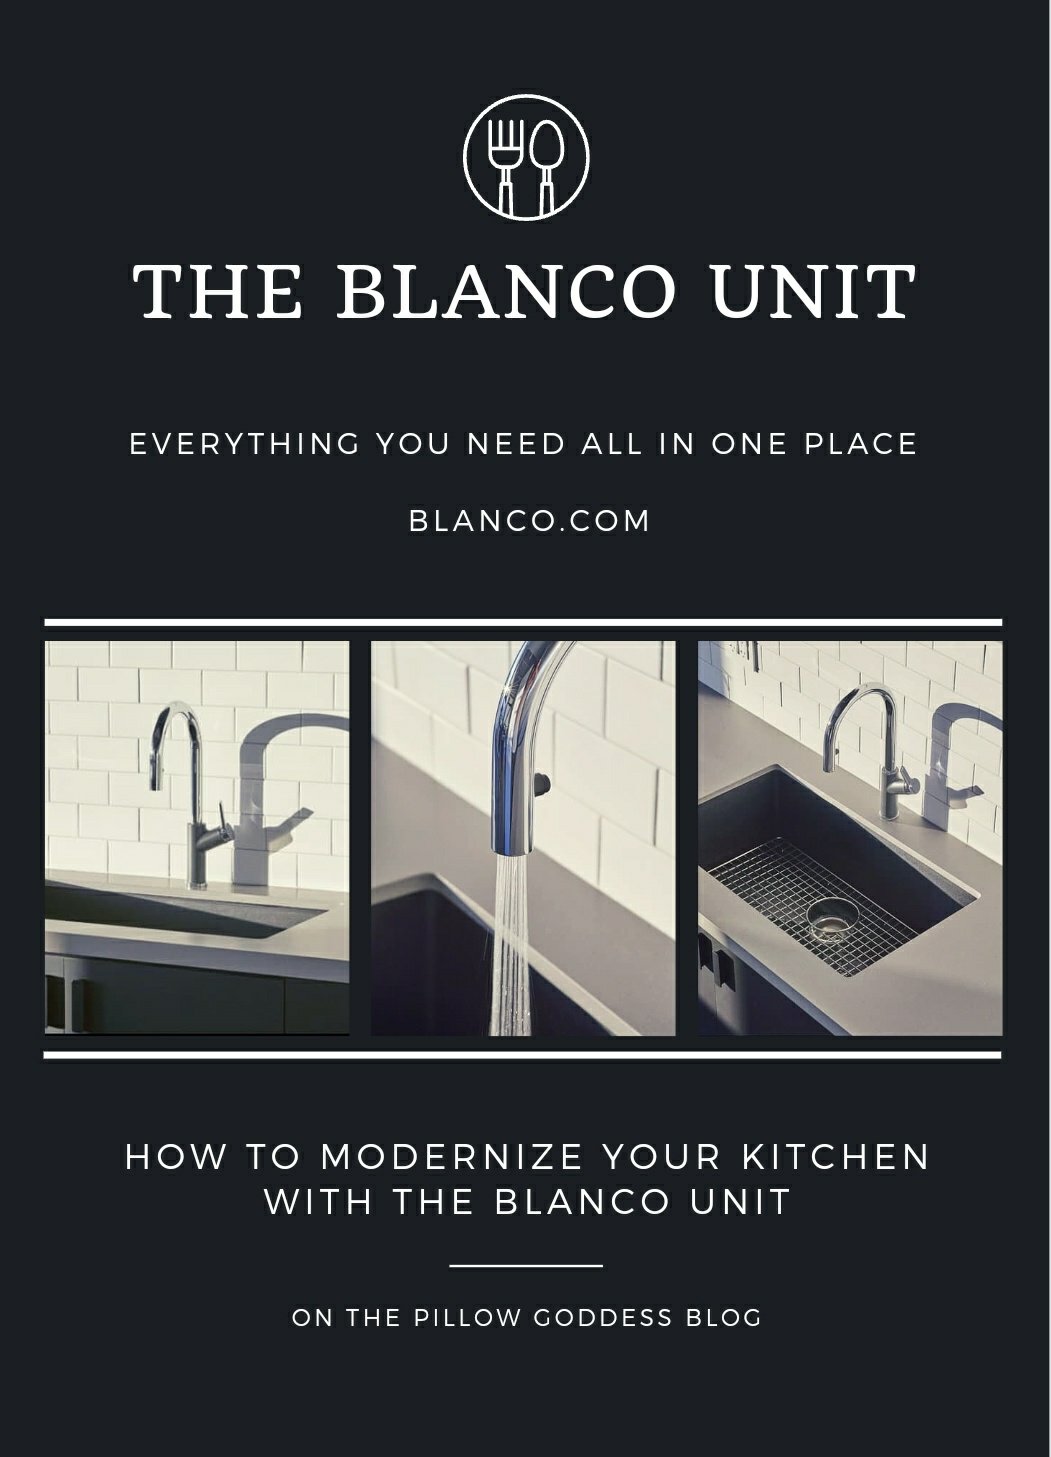 How to Modernize Your Kitchen with The BLANCO UNIT